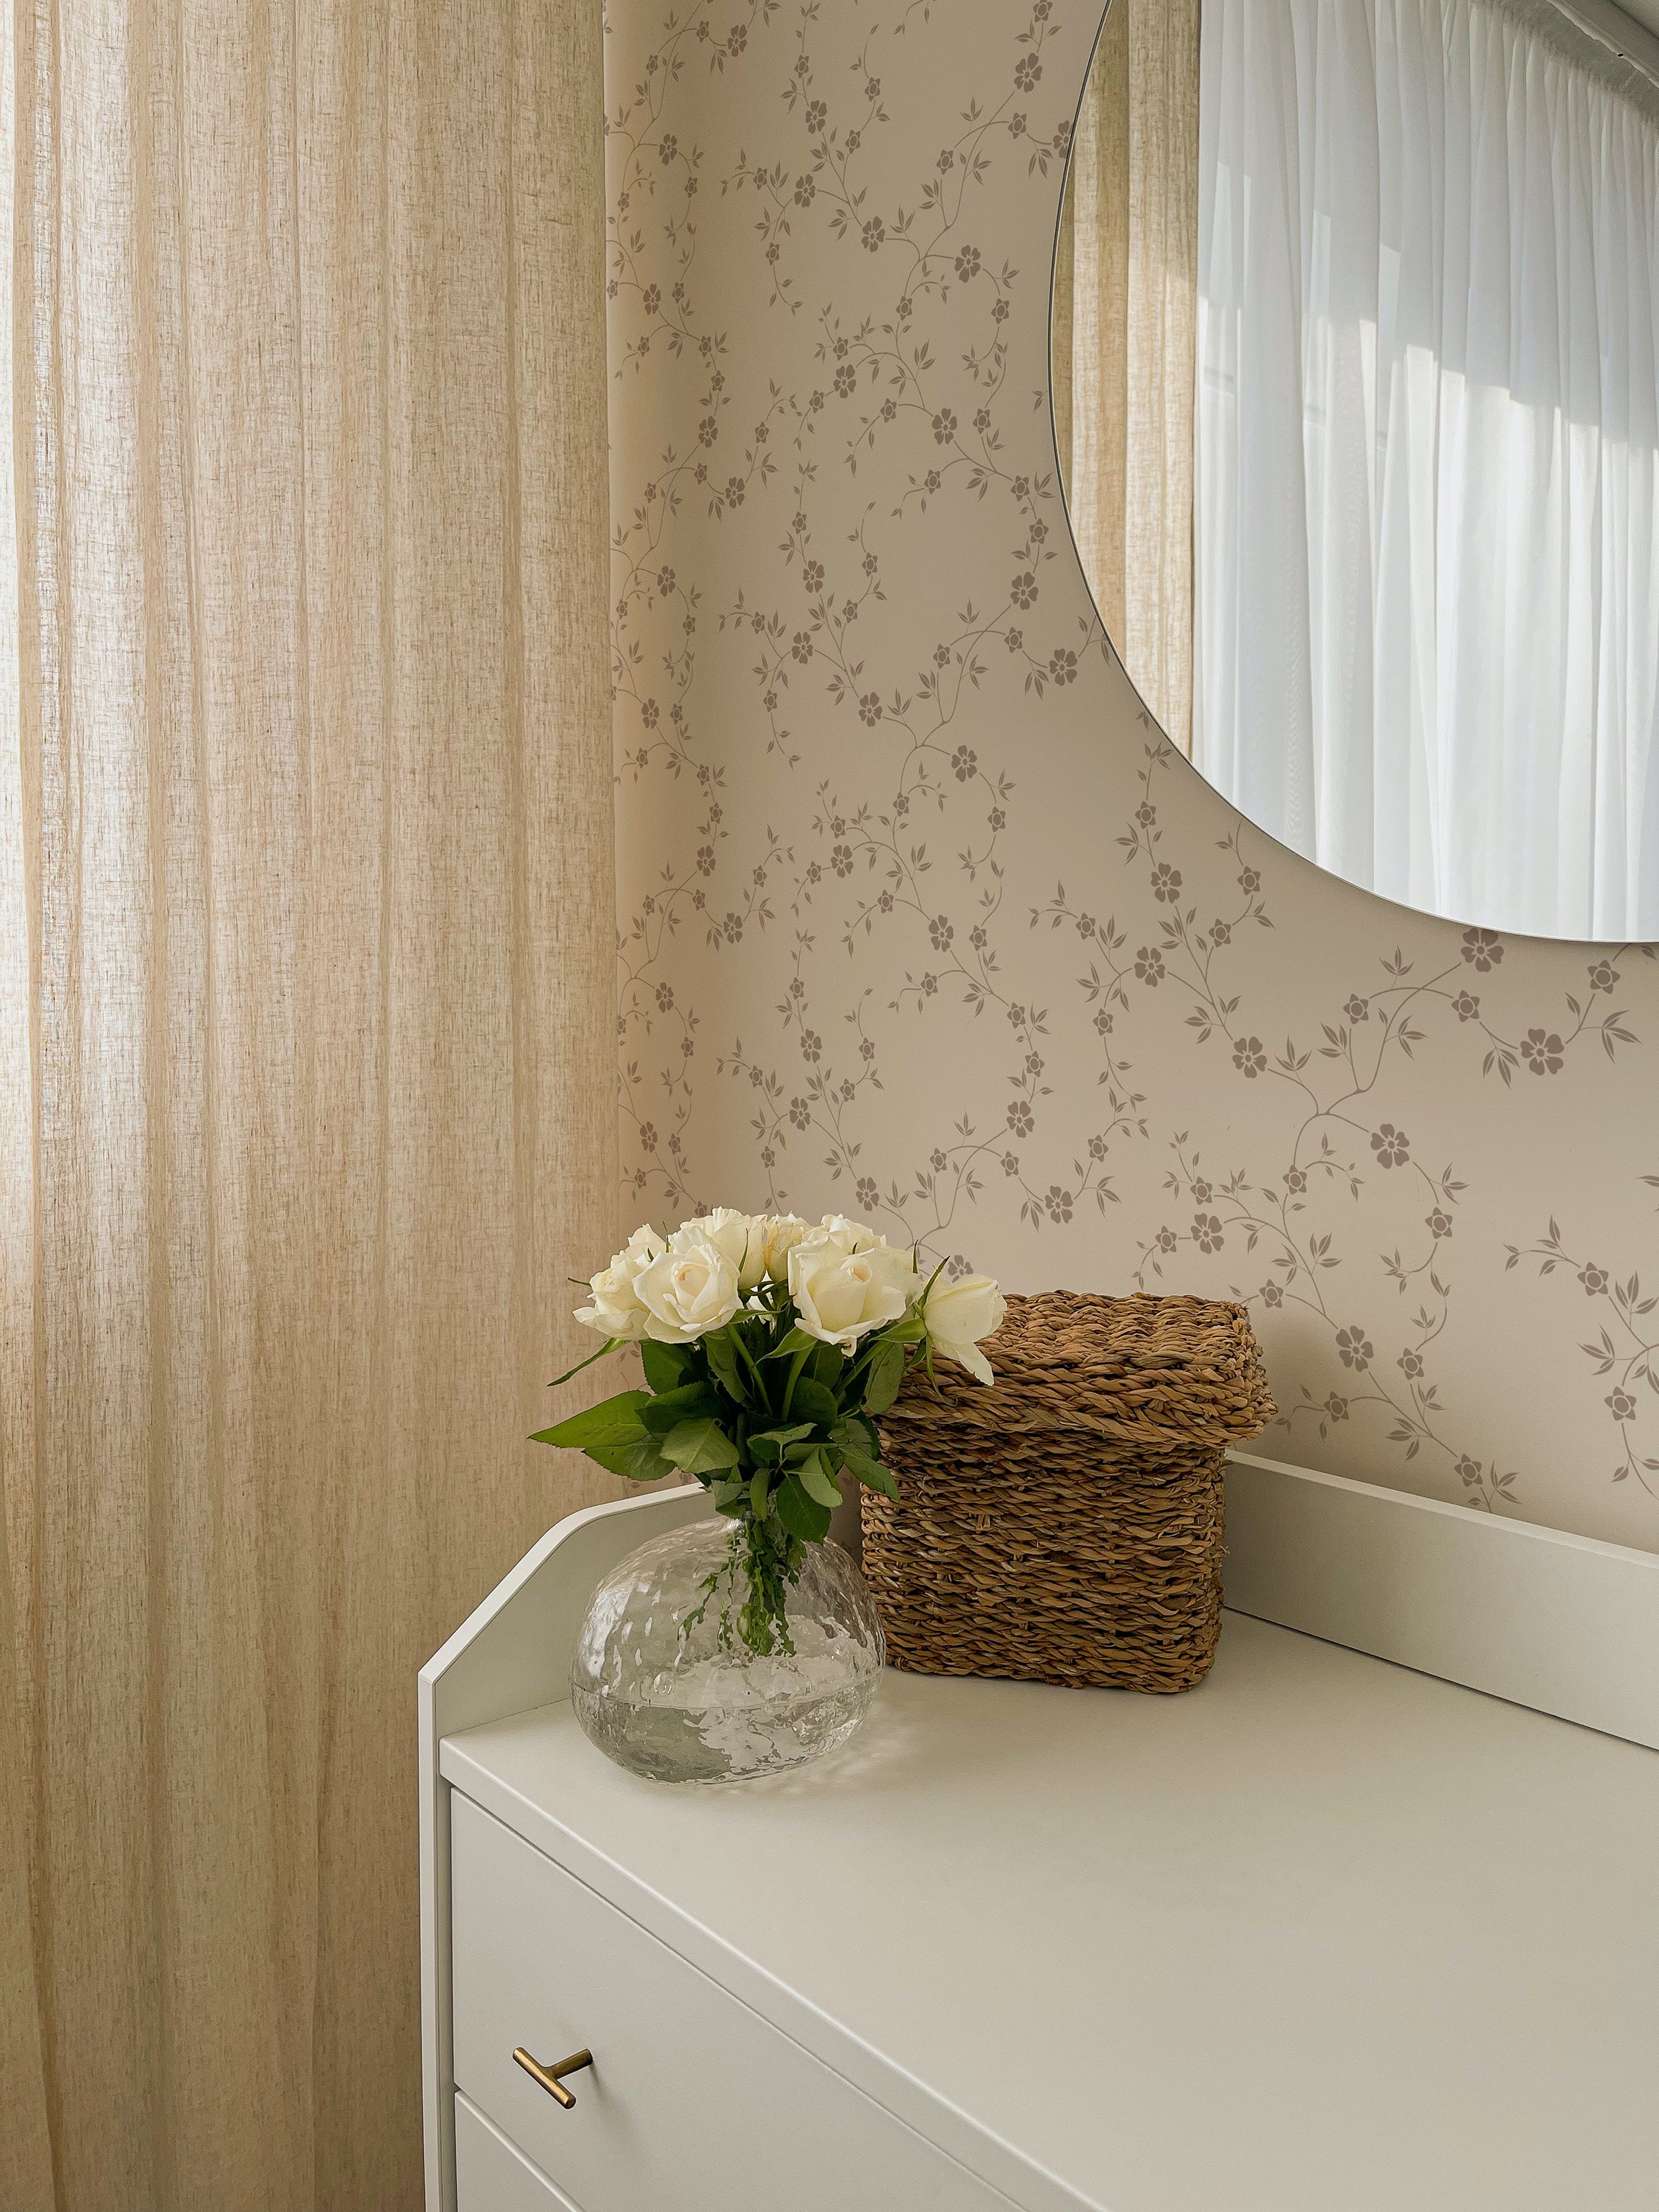 A chic corner of a room with a round mirror reflecting 'Charming Floral Wallpaper' on the adjacent wall. The wallpaper's beige floral pattern adds a warm, inviting feel to the space, complemented by a vase of white roses and a woven basket.